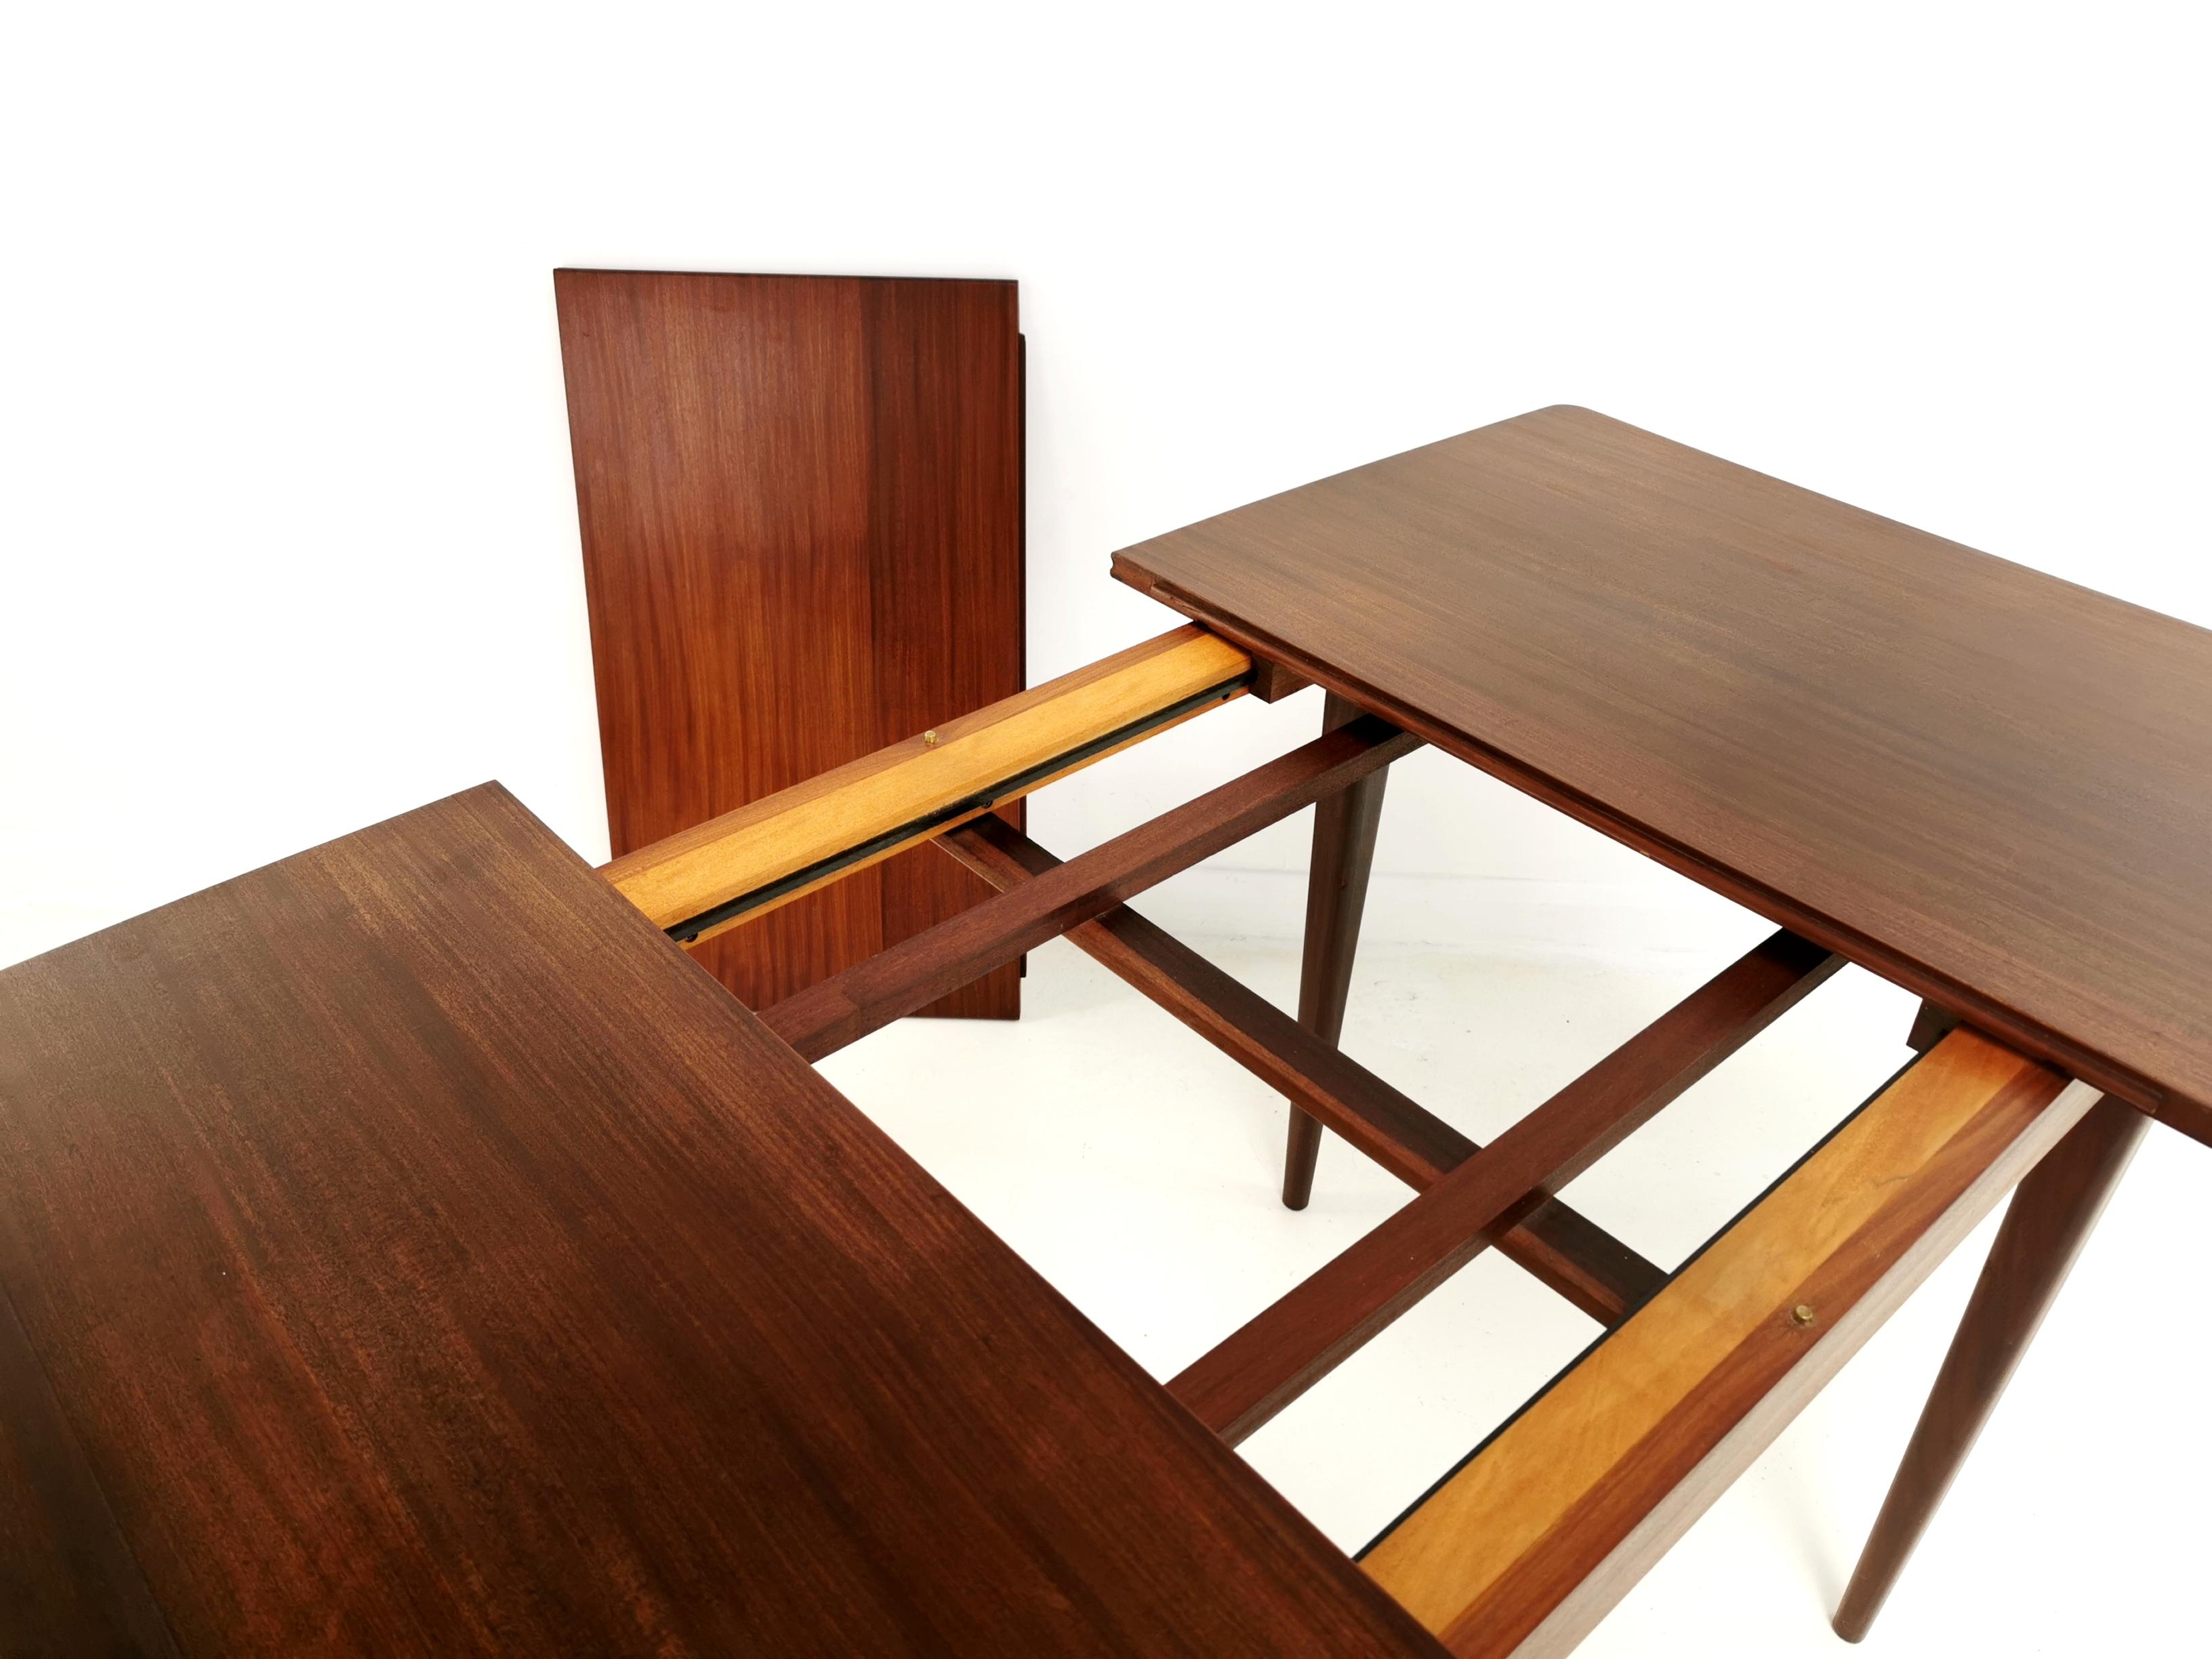 Richard Hornby teak dining table

Extendable teak dining table. This table was designed by Richard Hornby, circa 1960s. His elegantly crafted furniture was manufactured by Fyne Ladye Furniture of Bath, UK. Retailed through Heals. This is a rarely